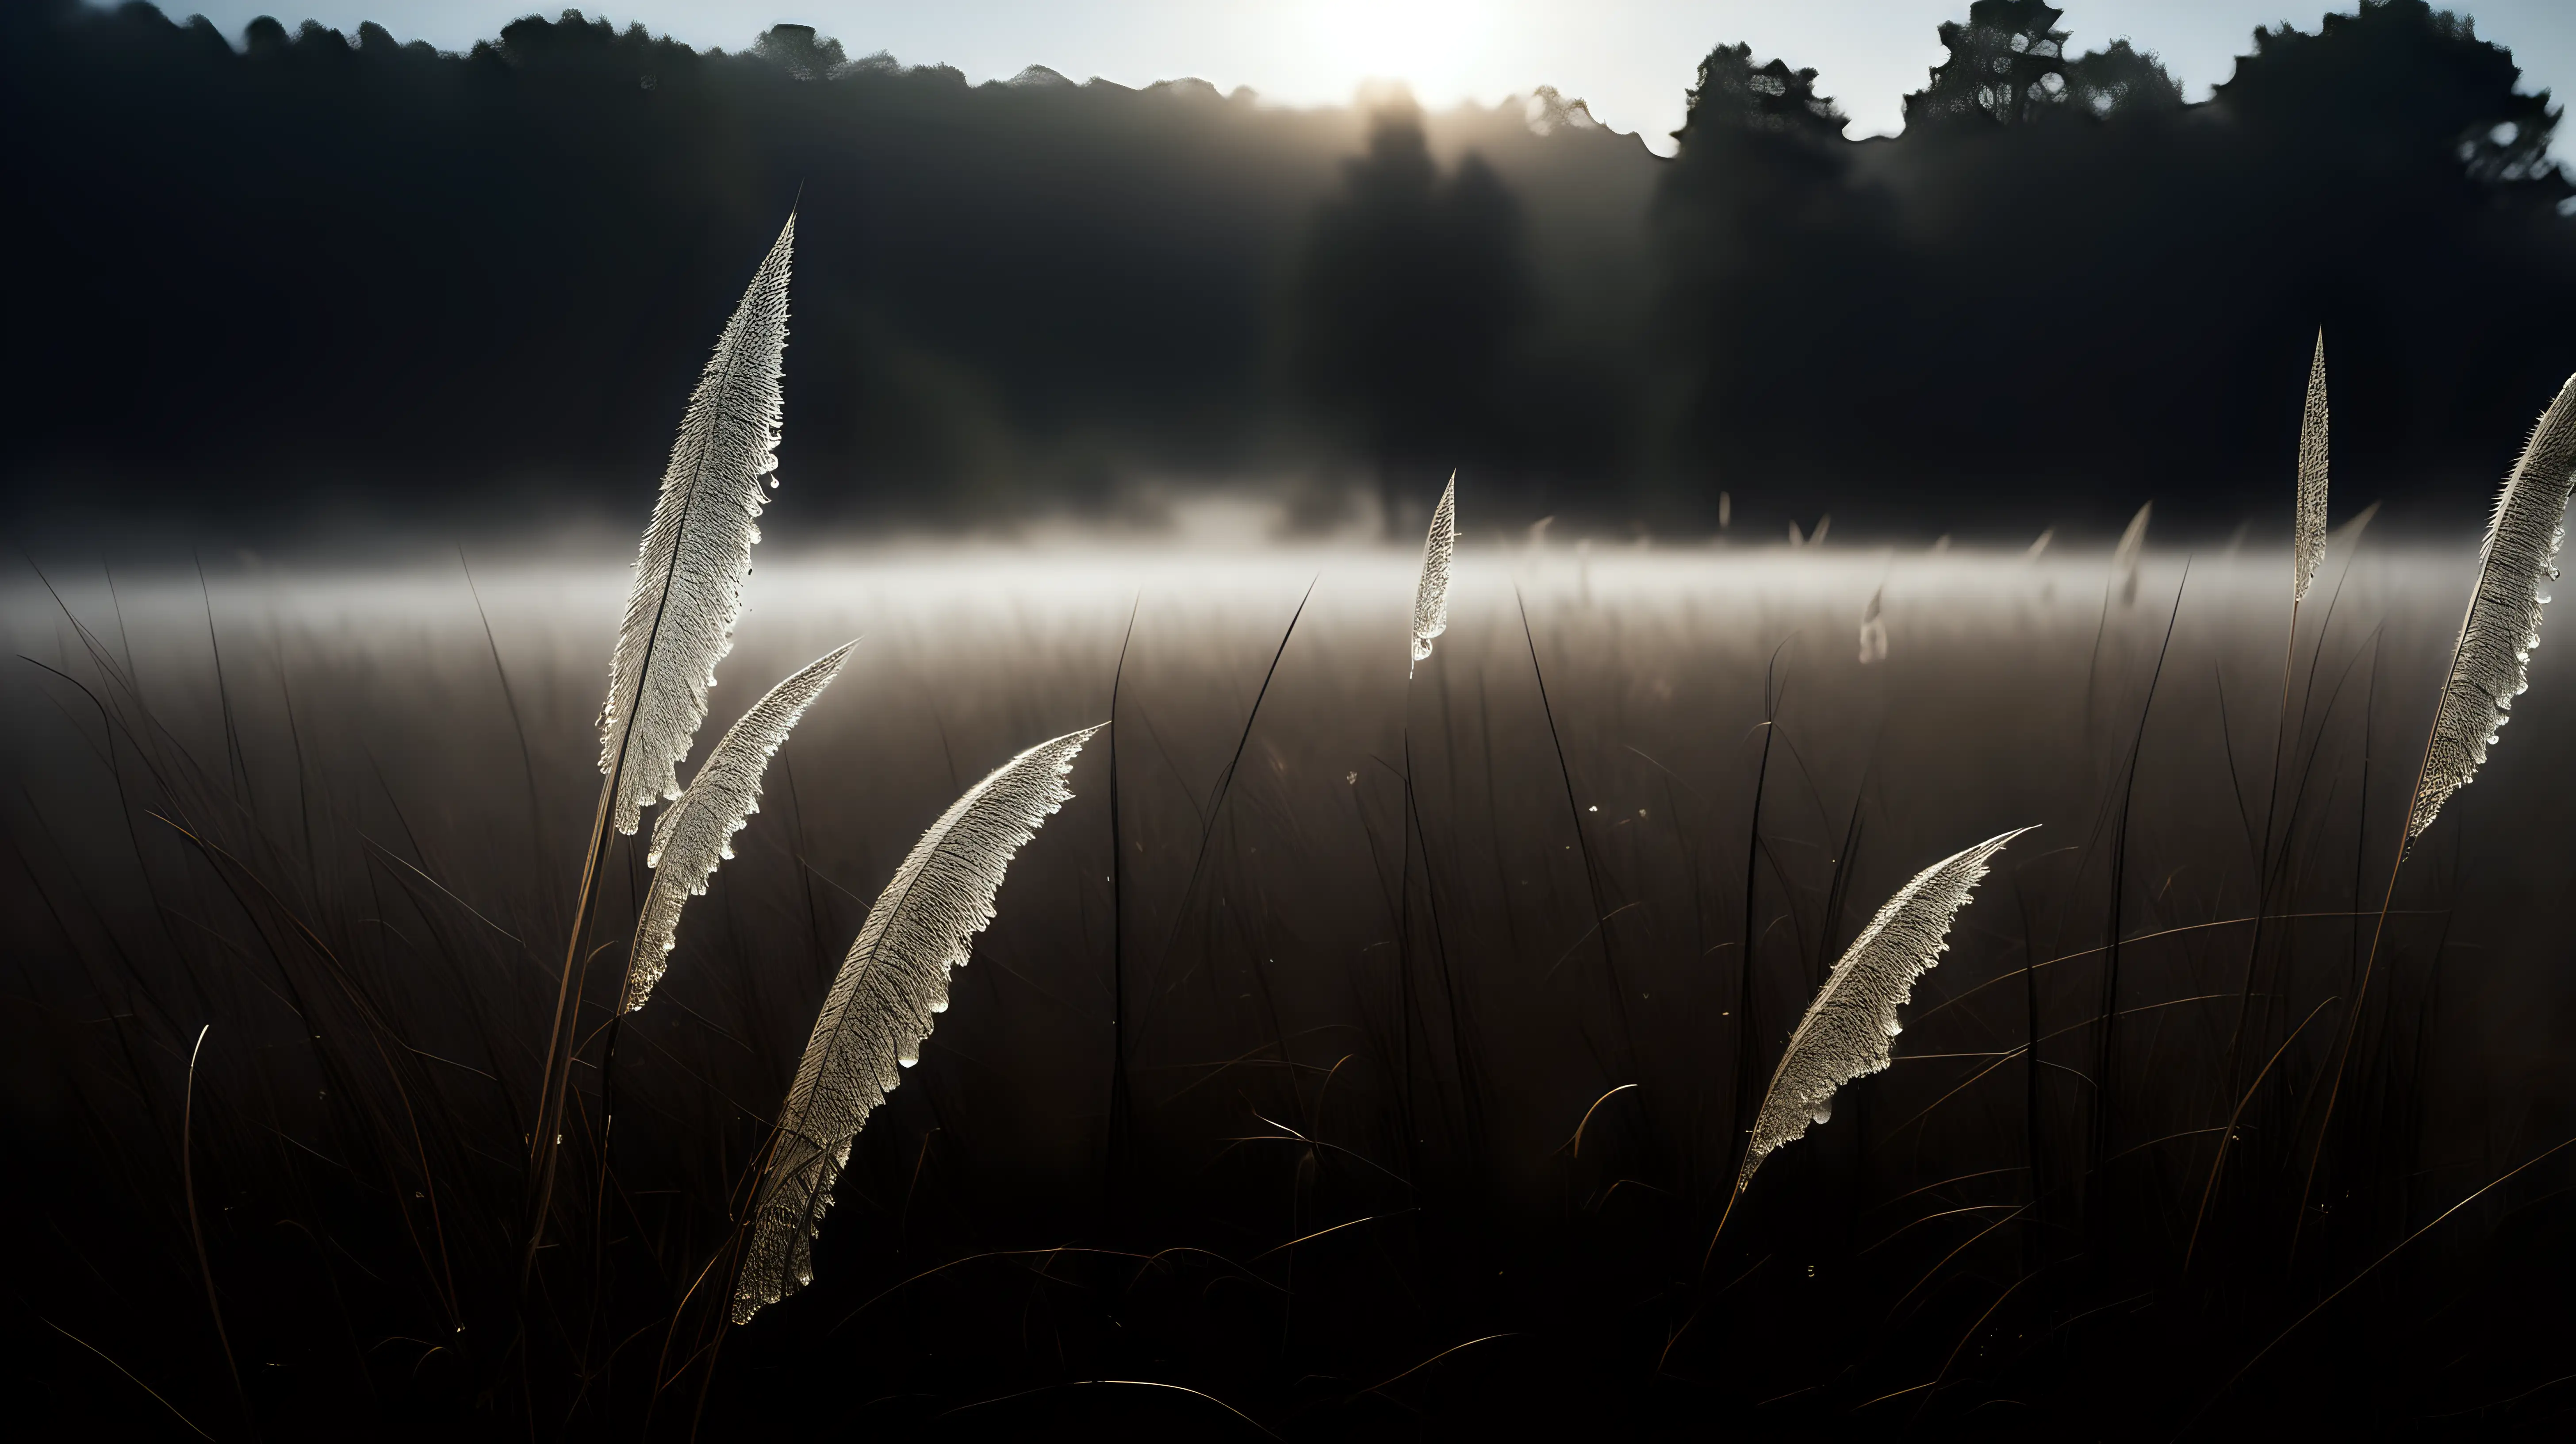 Mystical Meadow Enchanting Scene with High Dry Grass and Soft Light in Dense Fog